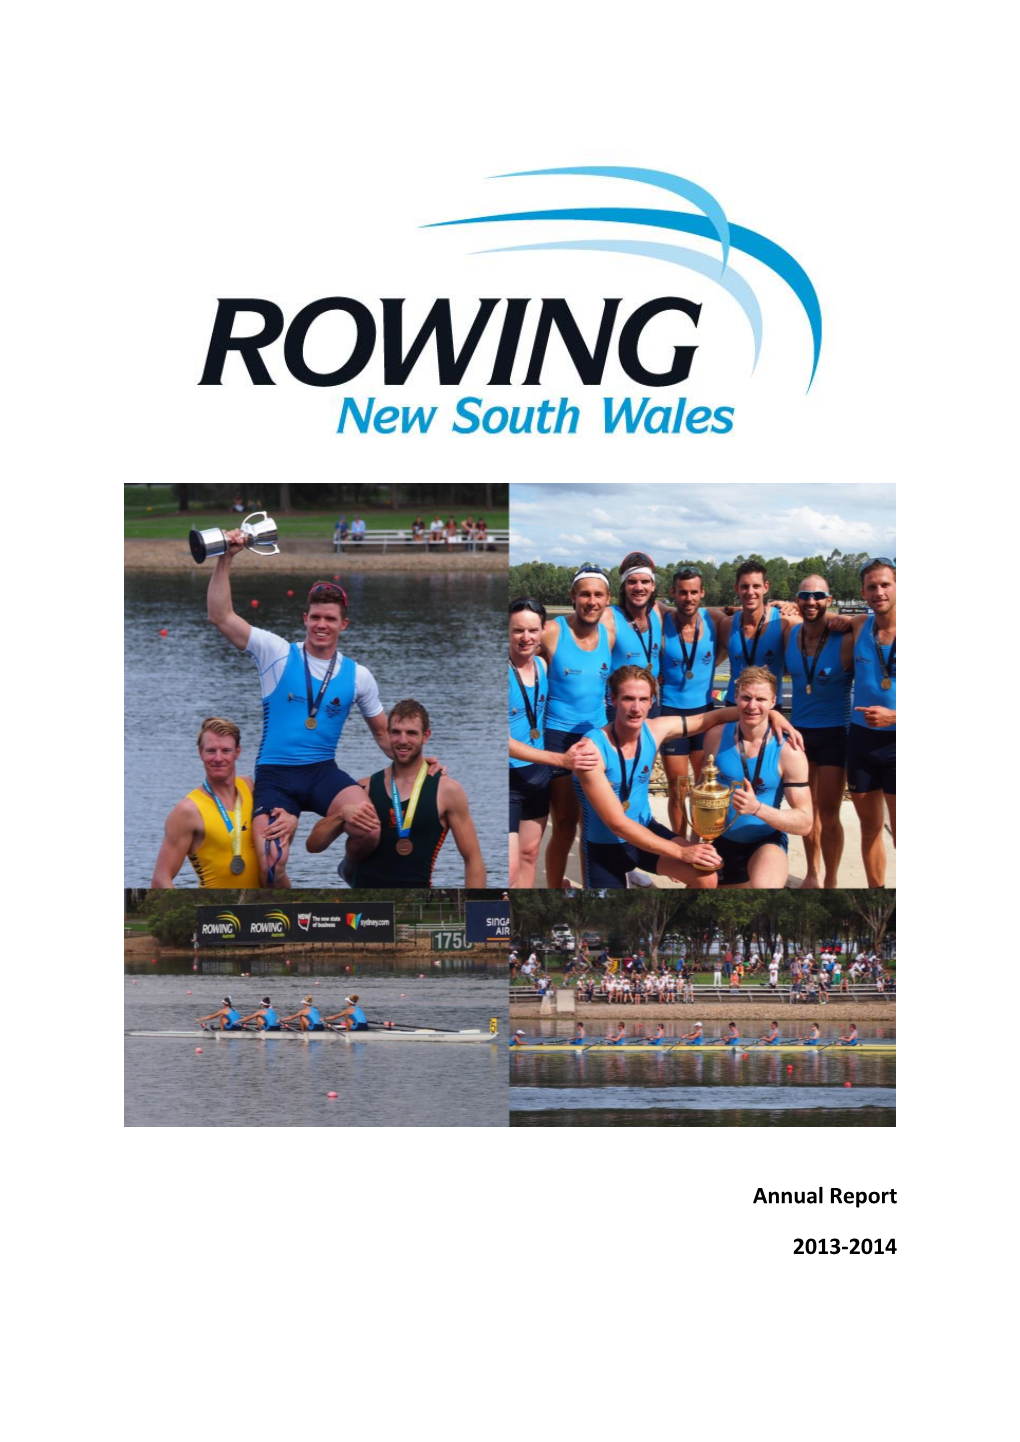 Annual Report 2013-2014 Page 3 ROWING NSW INC